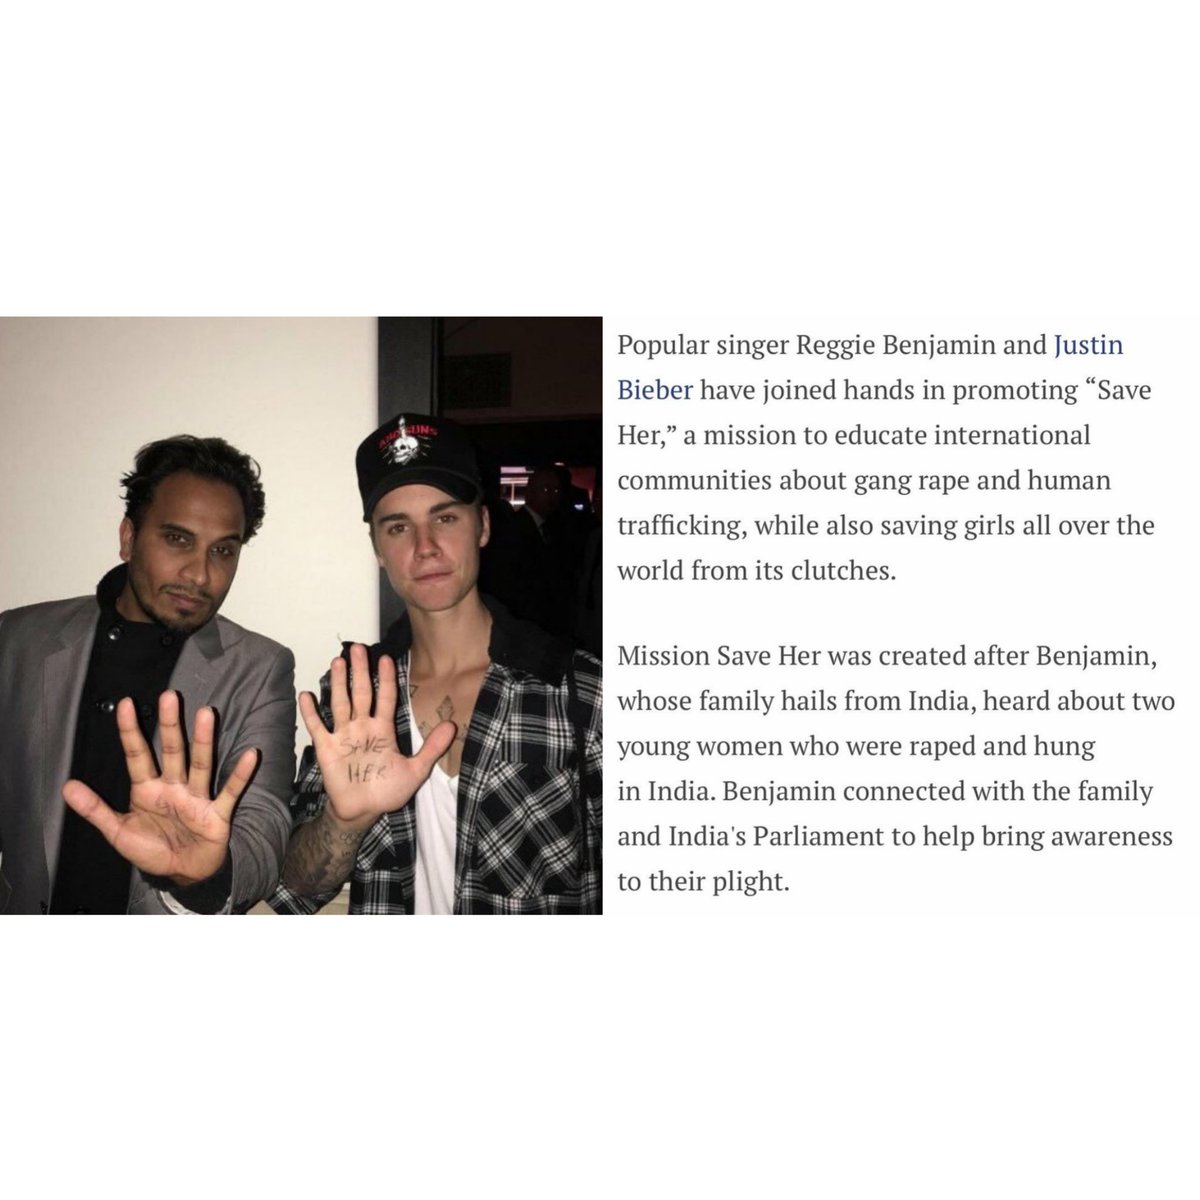 Justin expressed a pro-life stance before but that was due him almost being aborted, he changed his mind. He also punched a man abusing a woman, signed a petition to have more female producers and is a part of organization which brings awarness about women trafficking and r@pe.